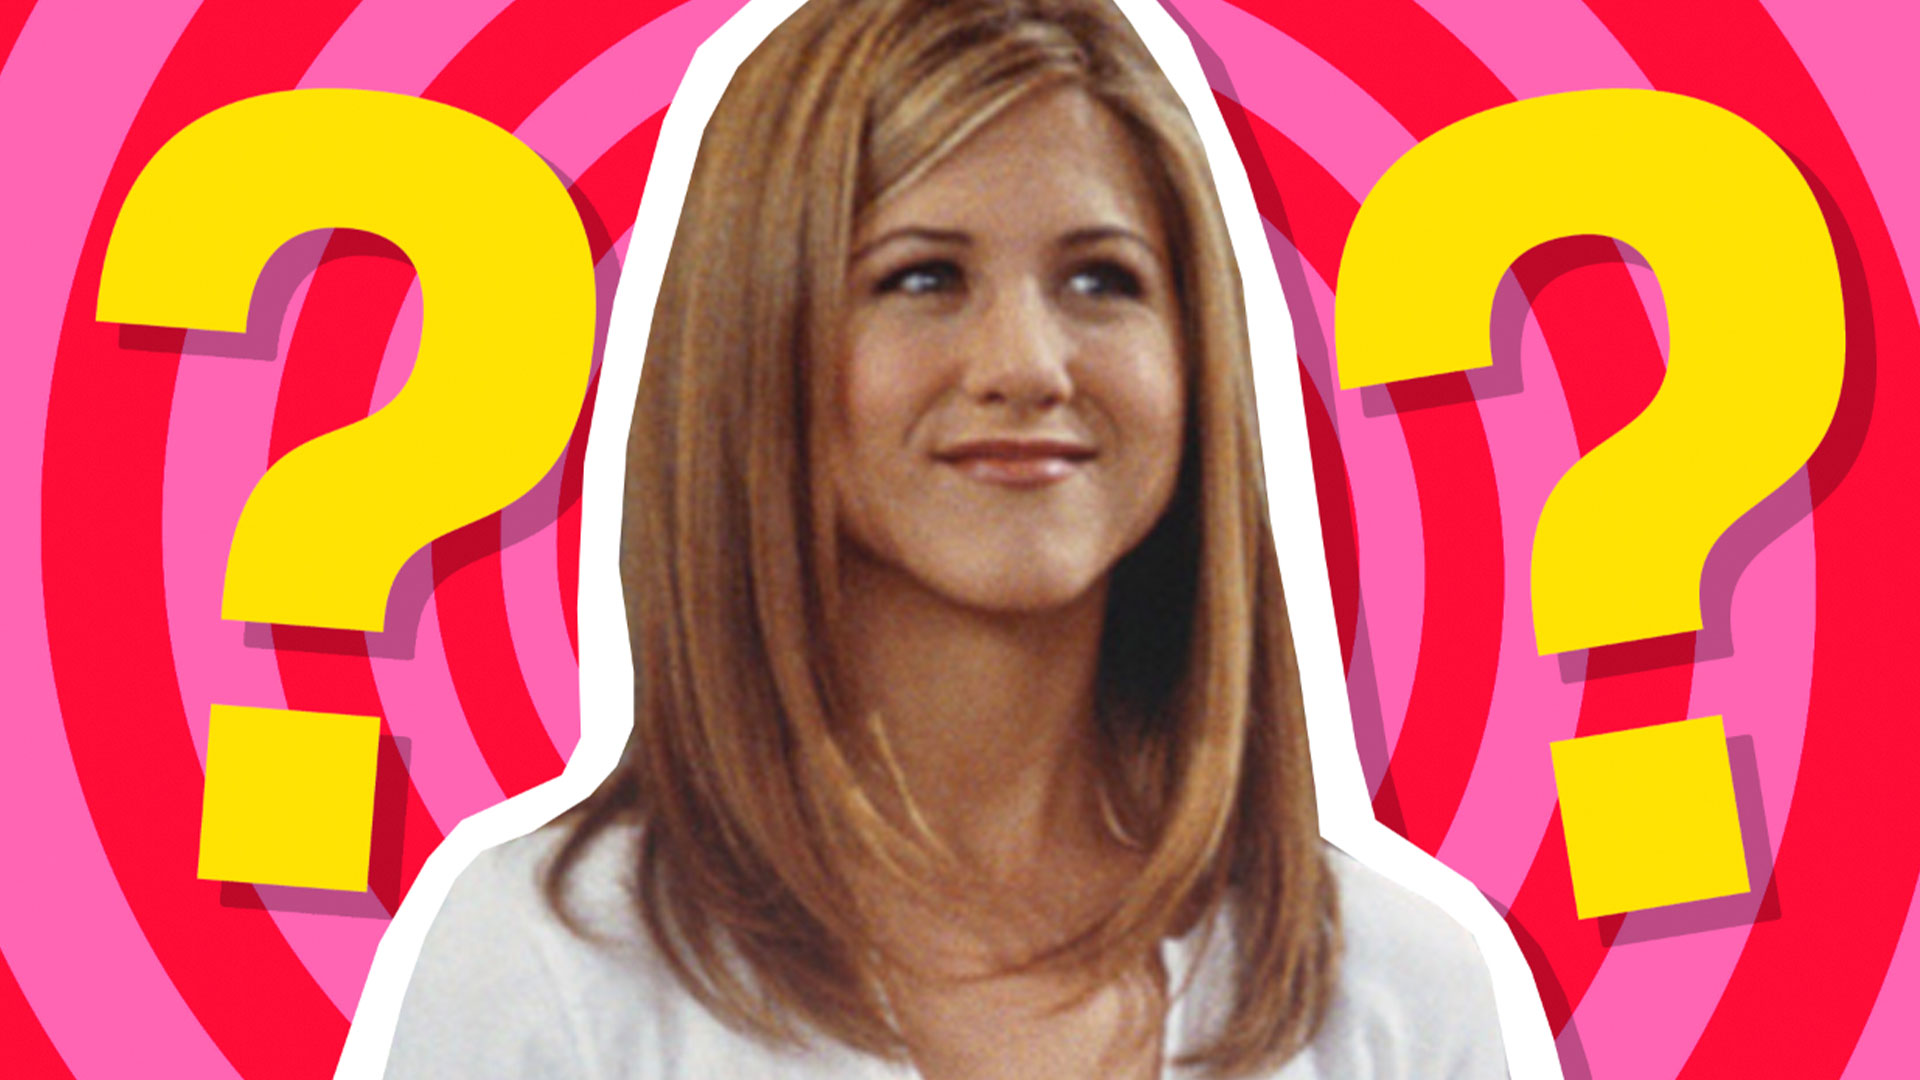 What Percentage Rachel Green are You?